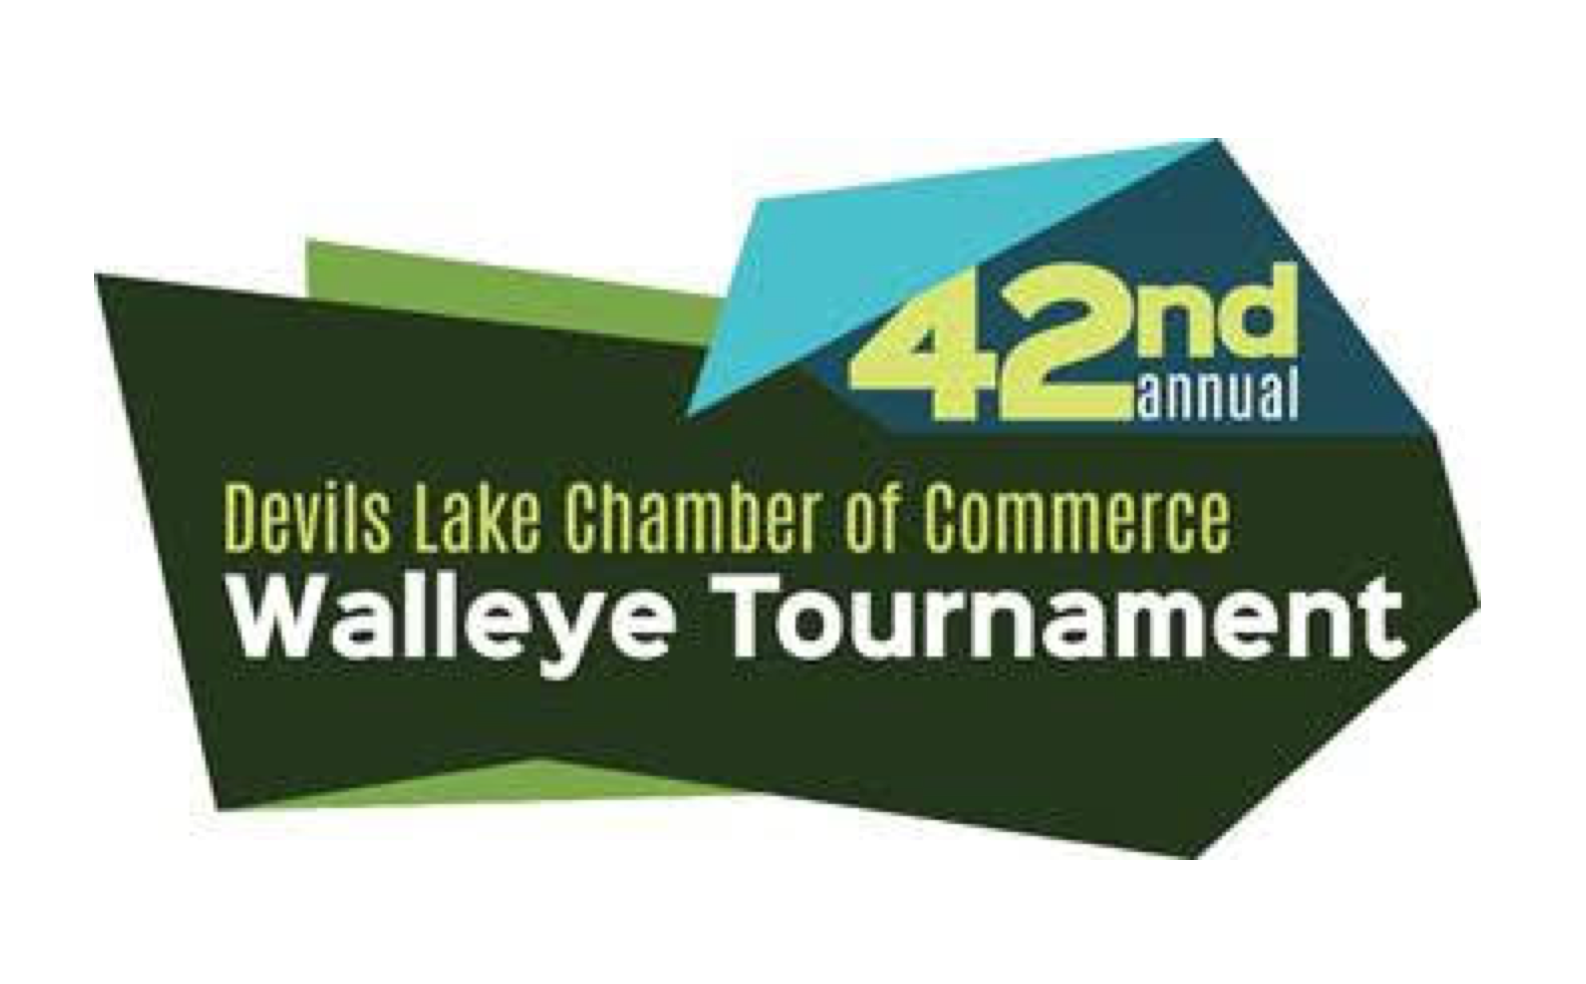 Devils Lake Chamber Tournament Has Much More than Catching